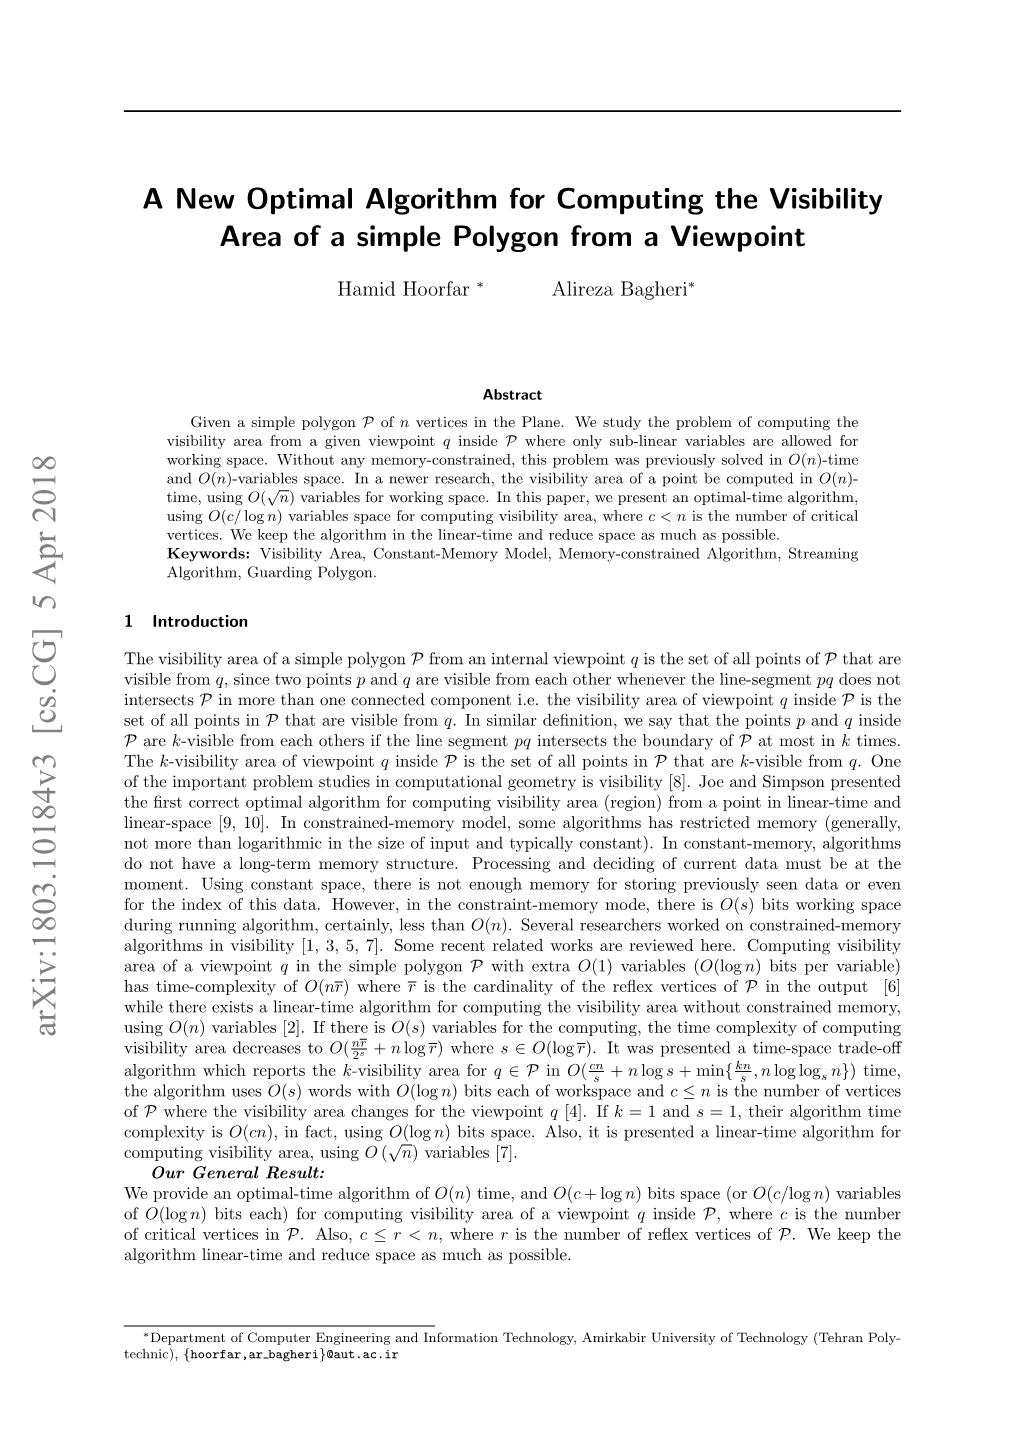 A New Optimal Algorithm for Computing the Visibility Area of a Simple Polygon from a Viewpoint